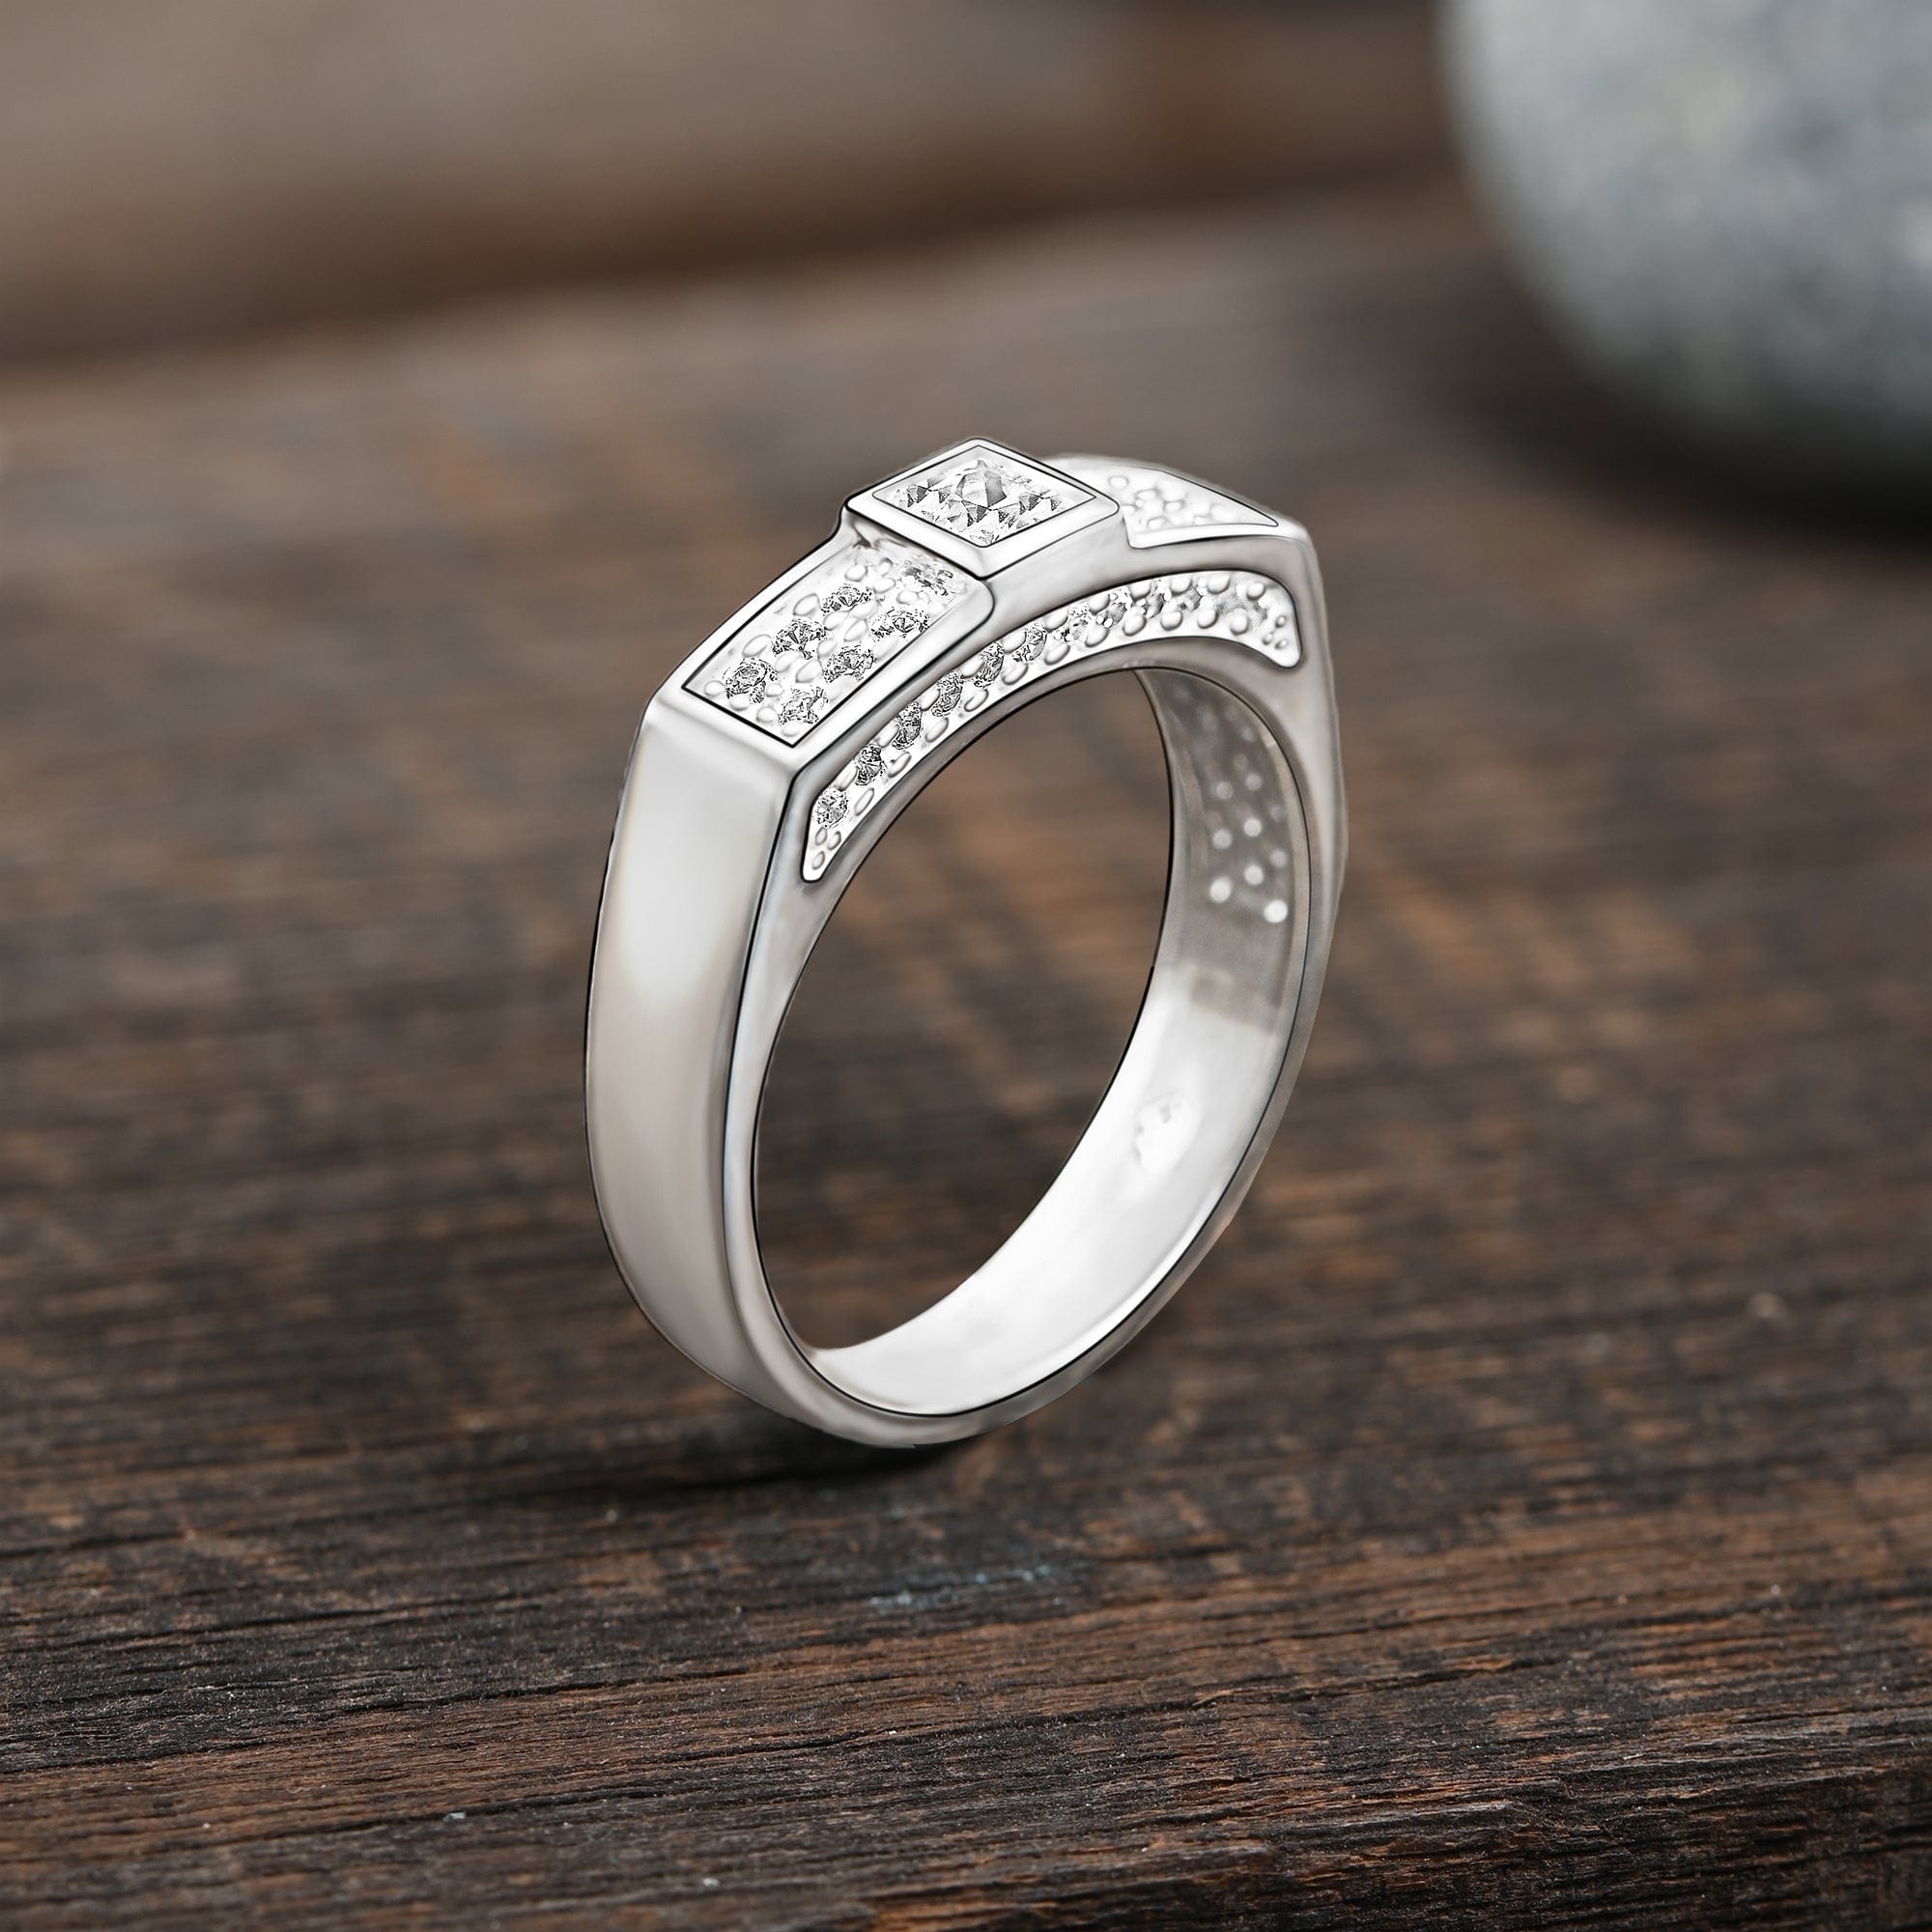 Shop LC Spinner Ring for Women - Spinning Anxiety Ring for Men - Wedding  Band 925 Sterling Silver Platinum Plated Celtic Statement Boho Jewelry  Stress